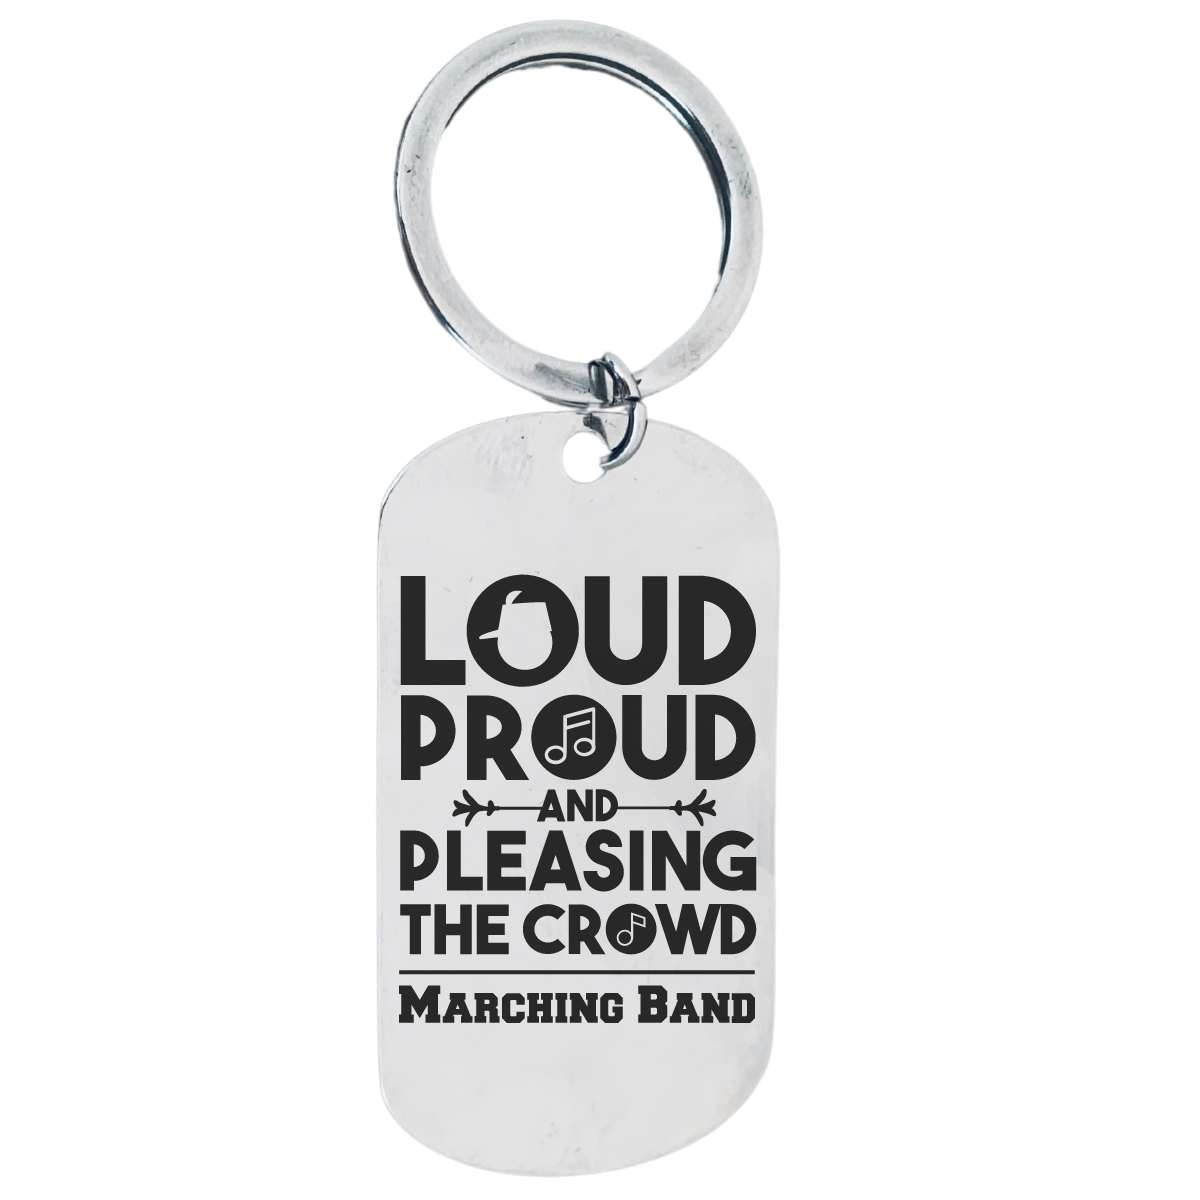 Marching Band Keychain - Loud, Proud and Pleasing the Crowd